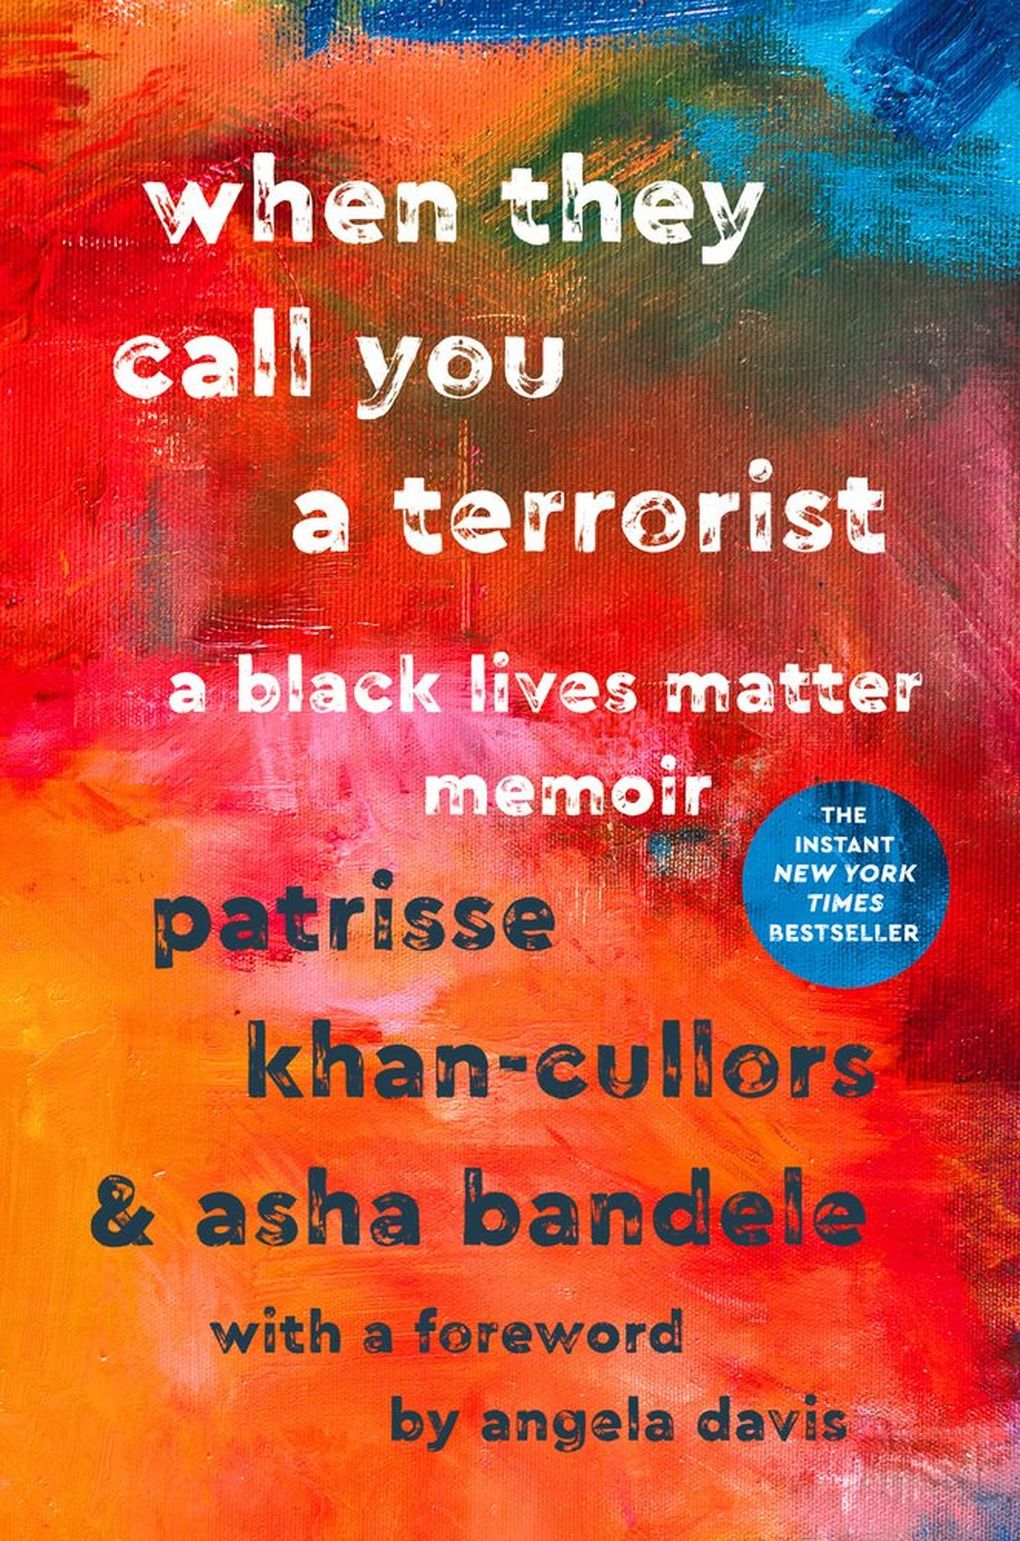 “When They Call You a Terrorist: A Black Lives Matter Memoir” by Patrisse Khan-Cullors and Asha Bandele (Macmillan Publishers)